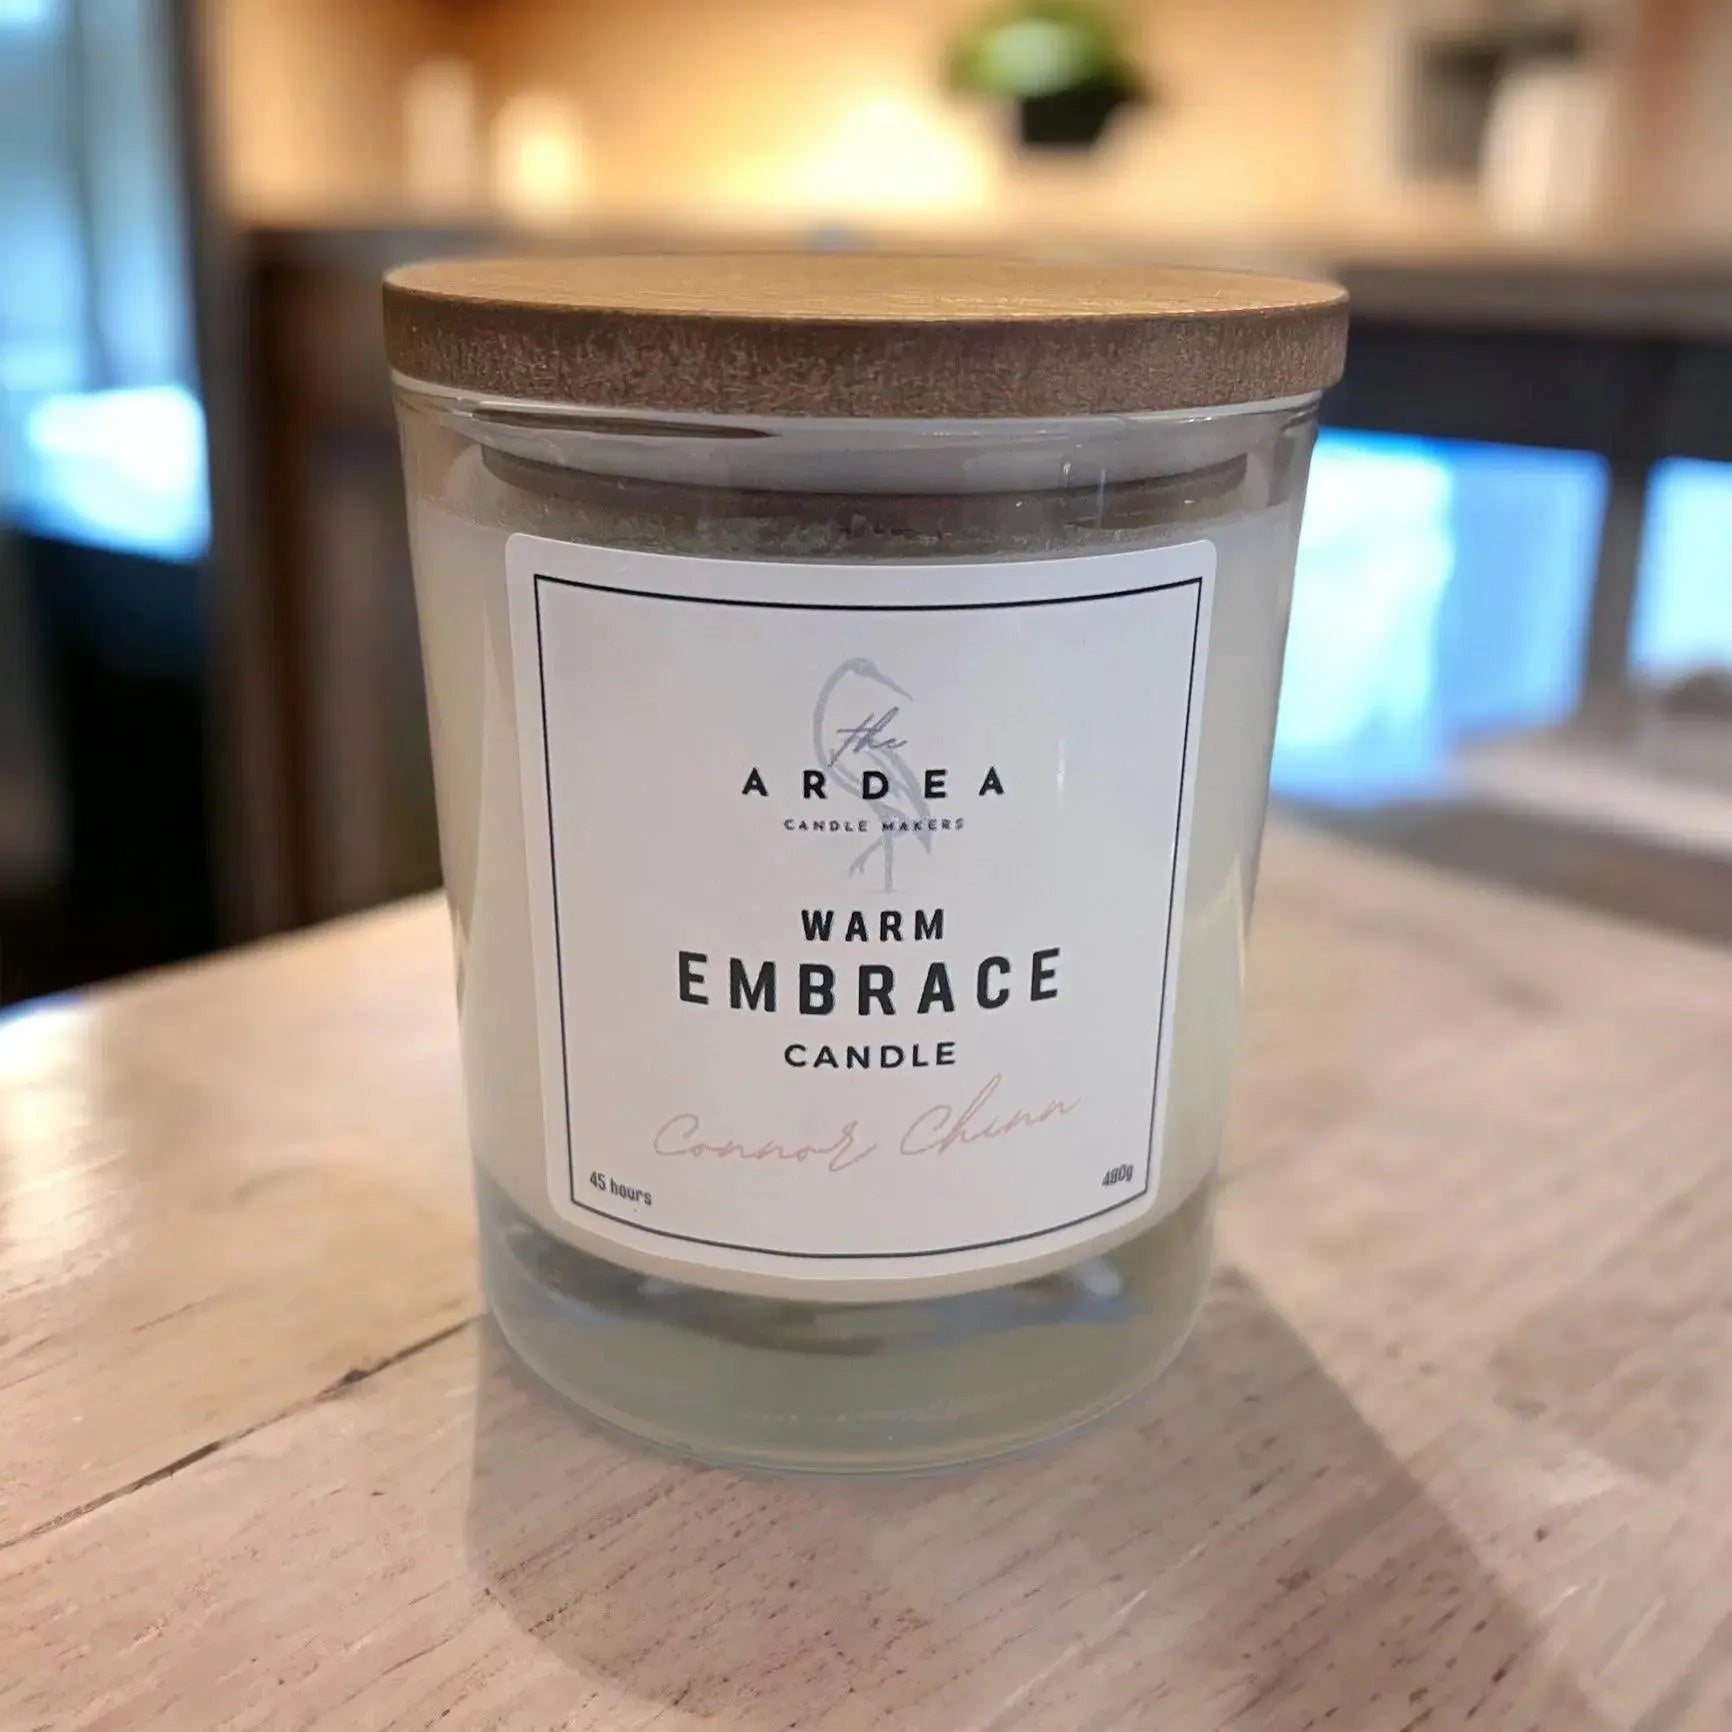 Warm Embrace Candle - 600g - The Ardea Candle Makers